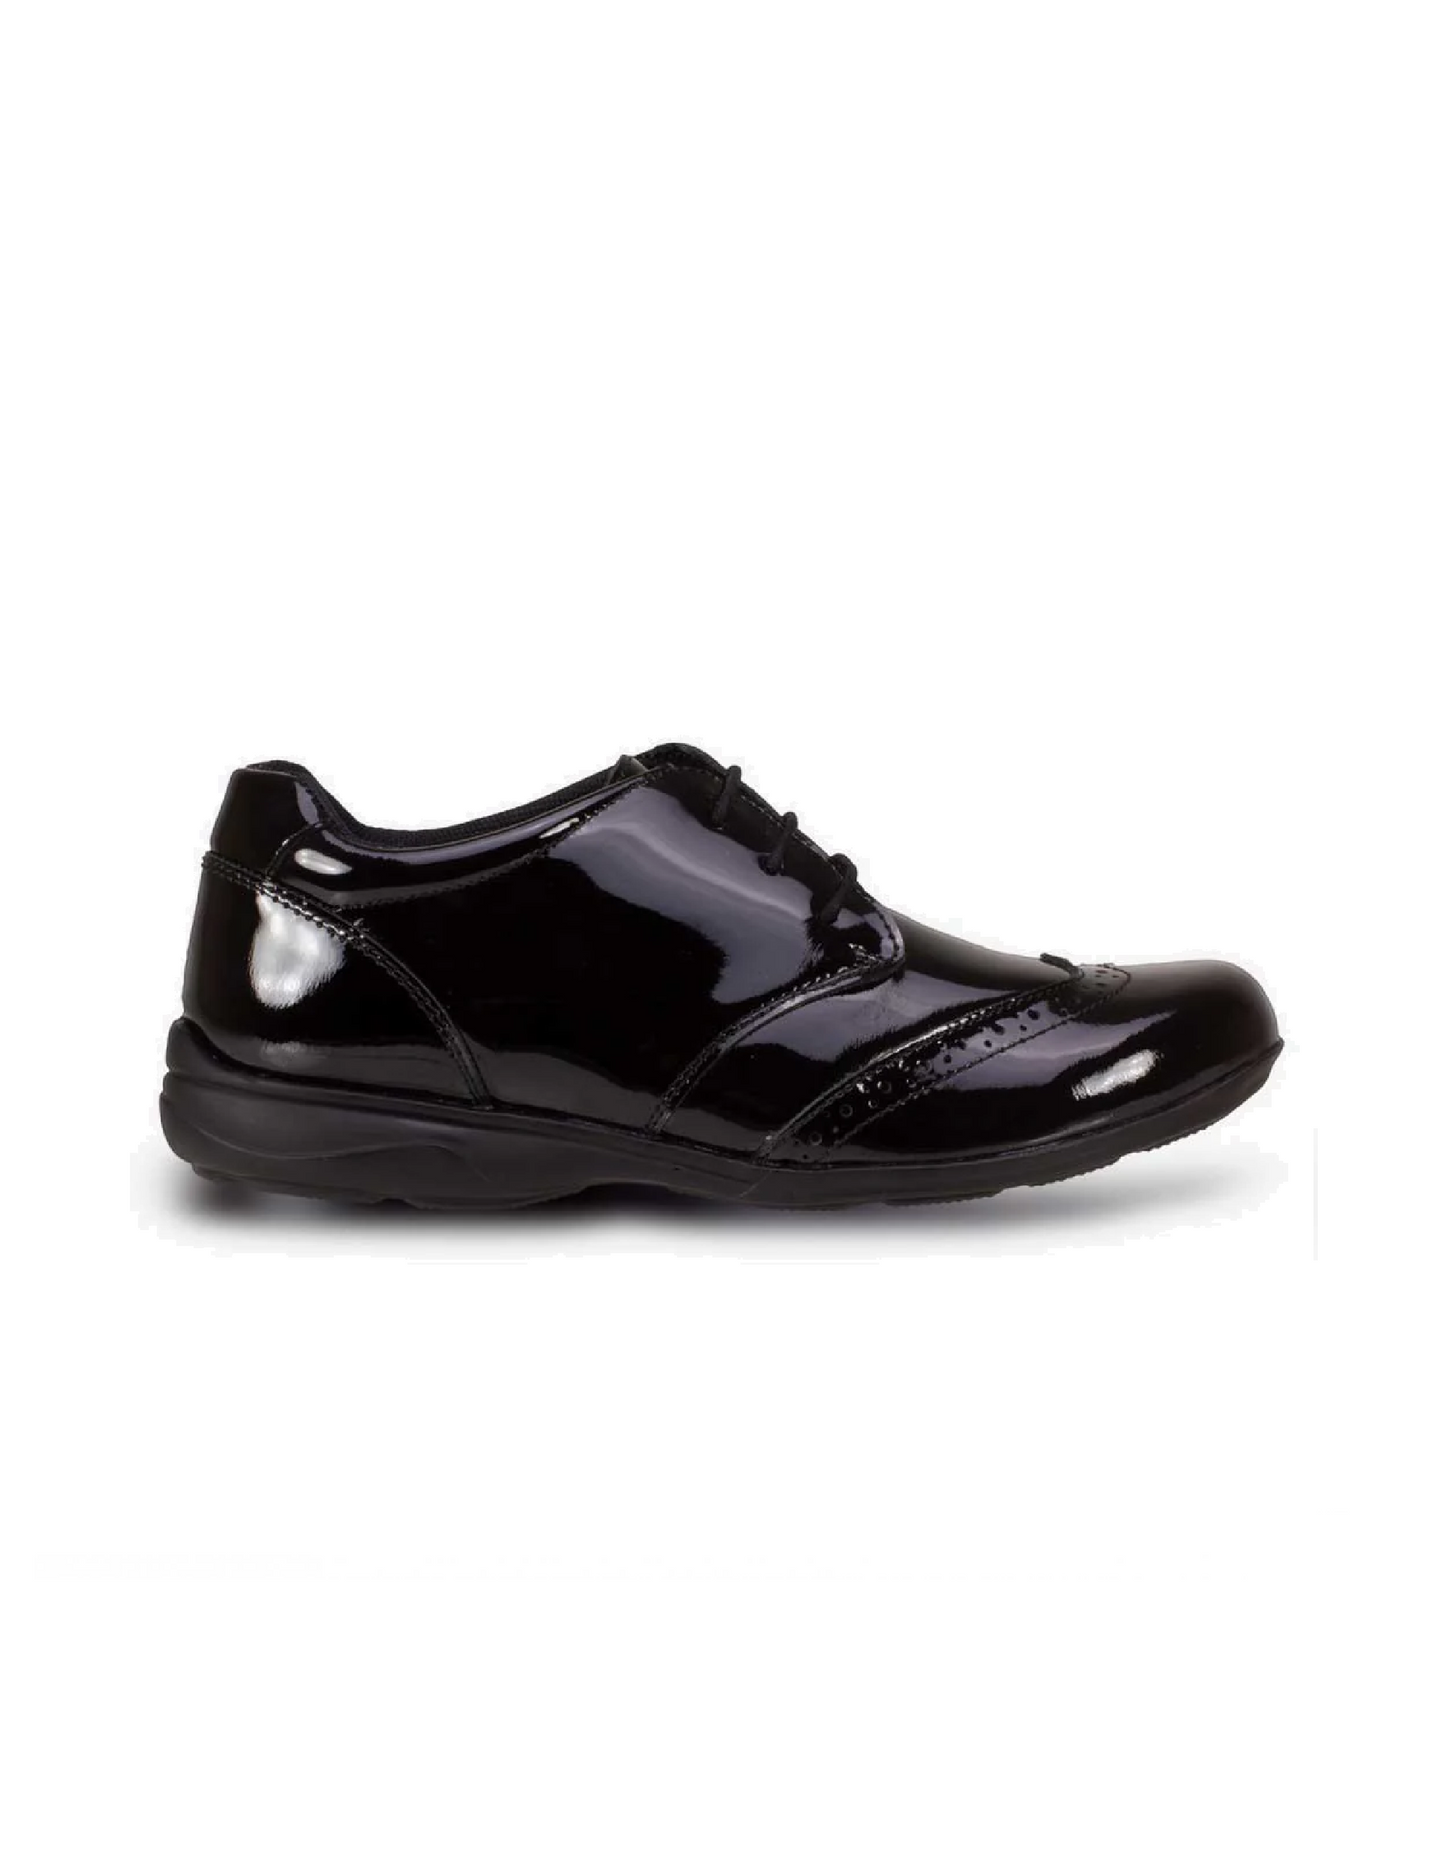 Term Summer Black Patent Leather Lace Up Brogue